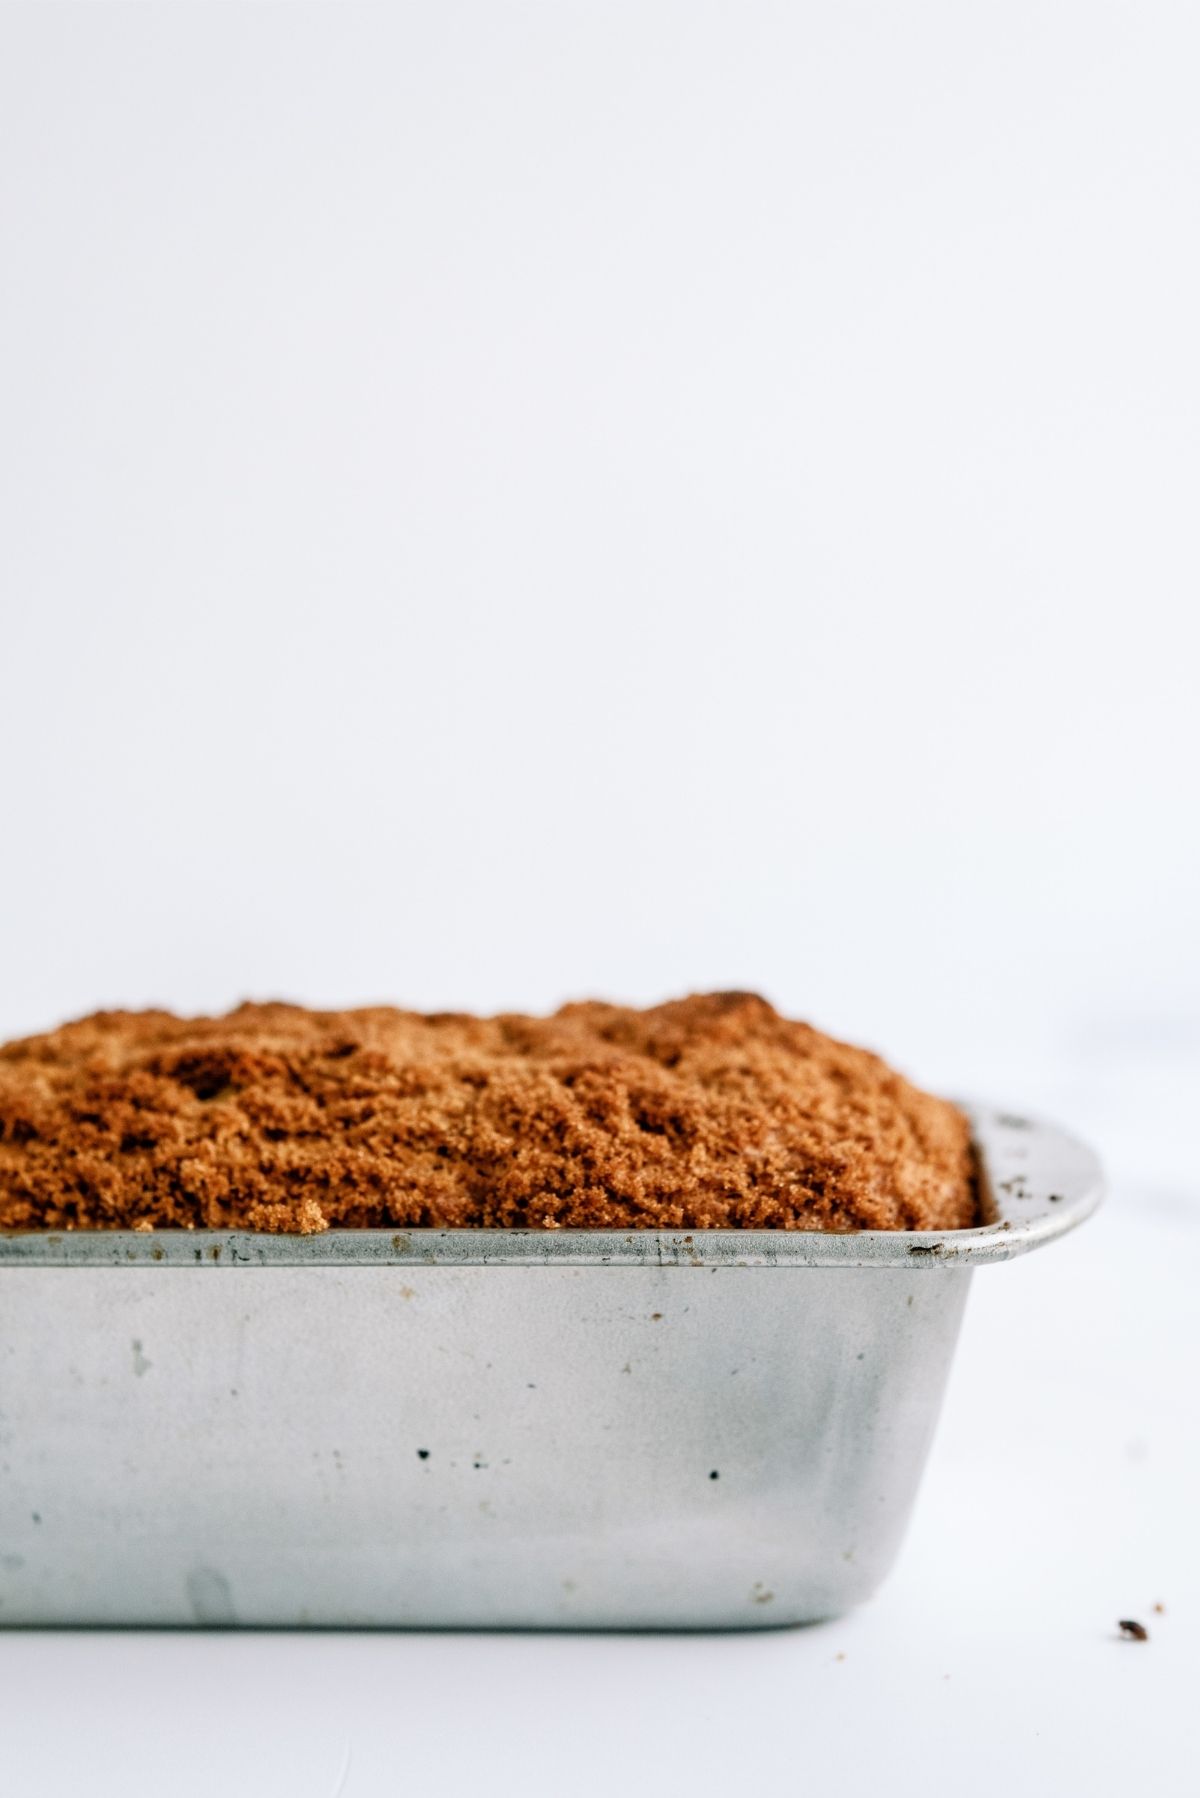 Cinnamon and Sugar Quick Bread in loaf pan ready to bake